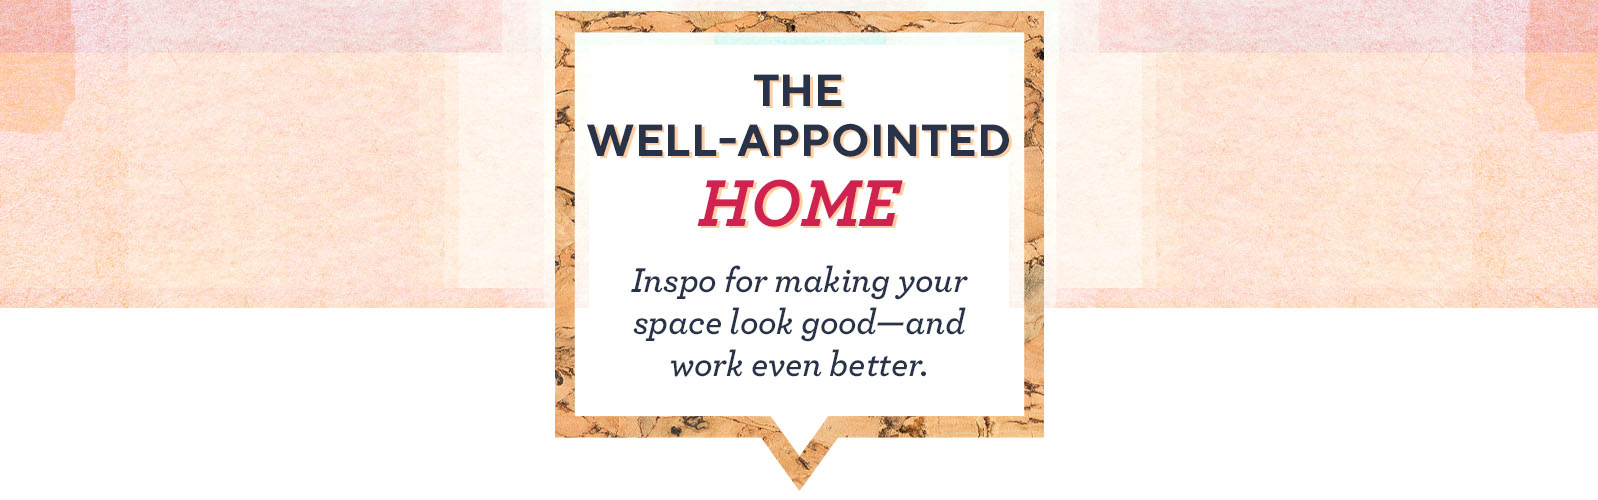 The Well-Appointed Home: Inspo for making your space look good—and work even better.